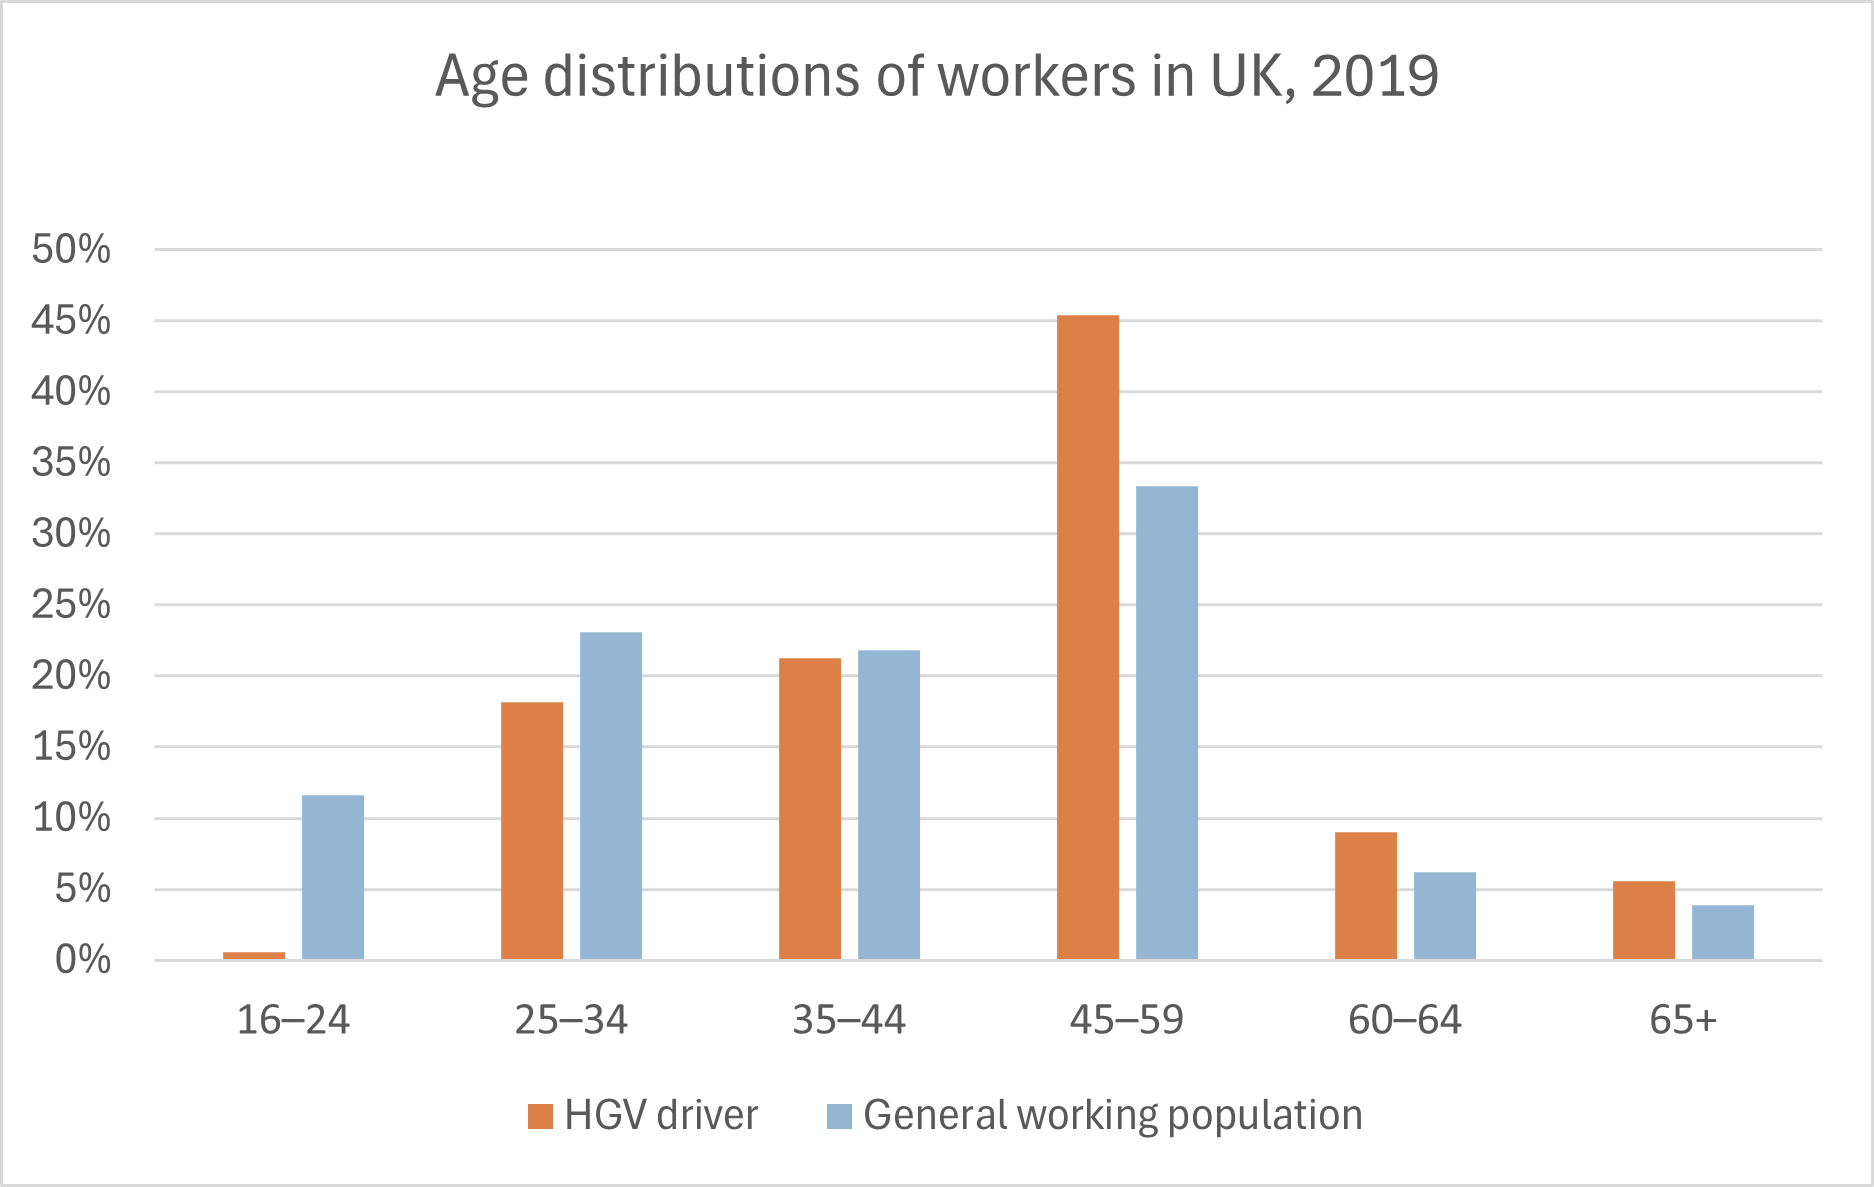 Age distributions of UK workers